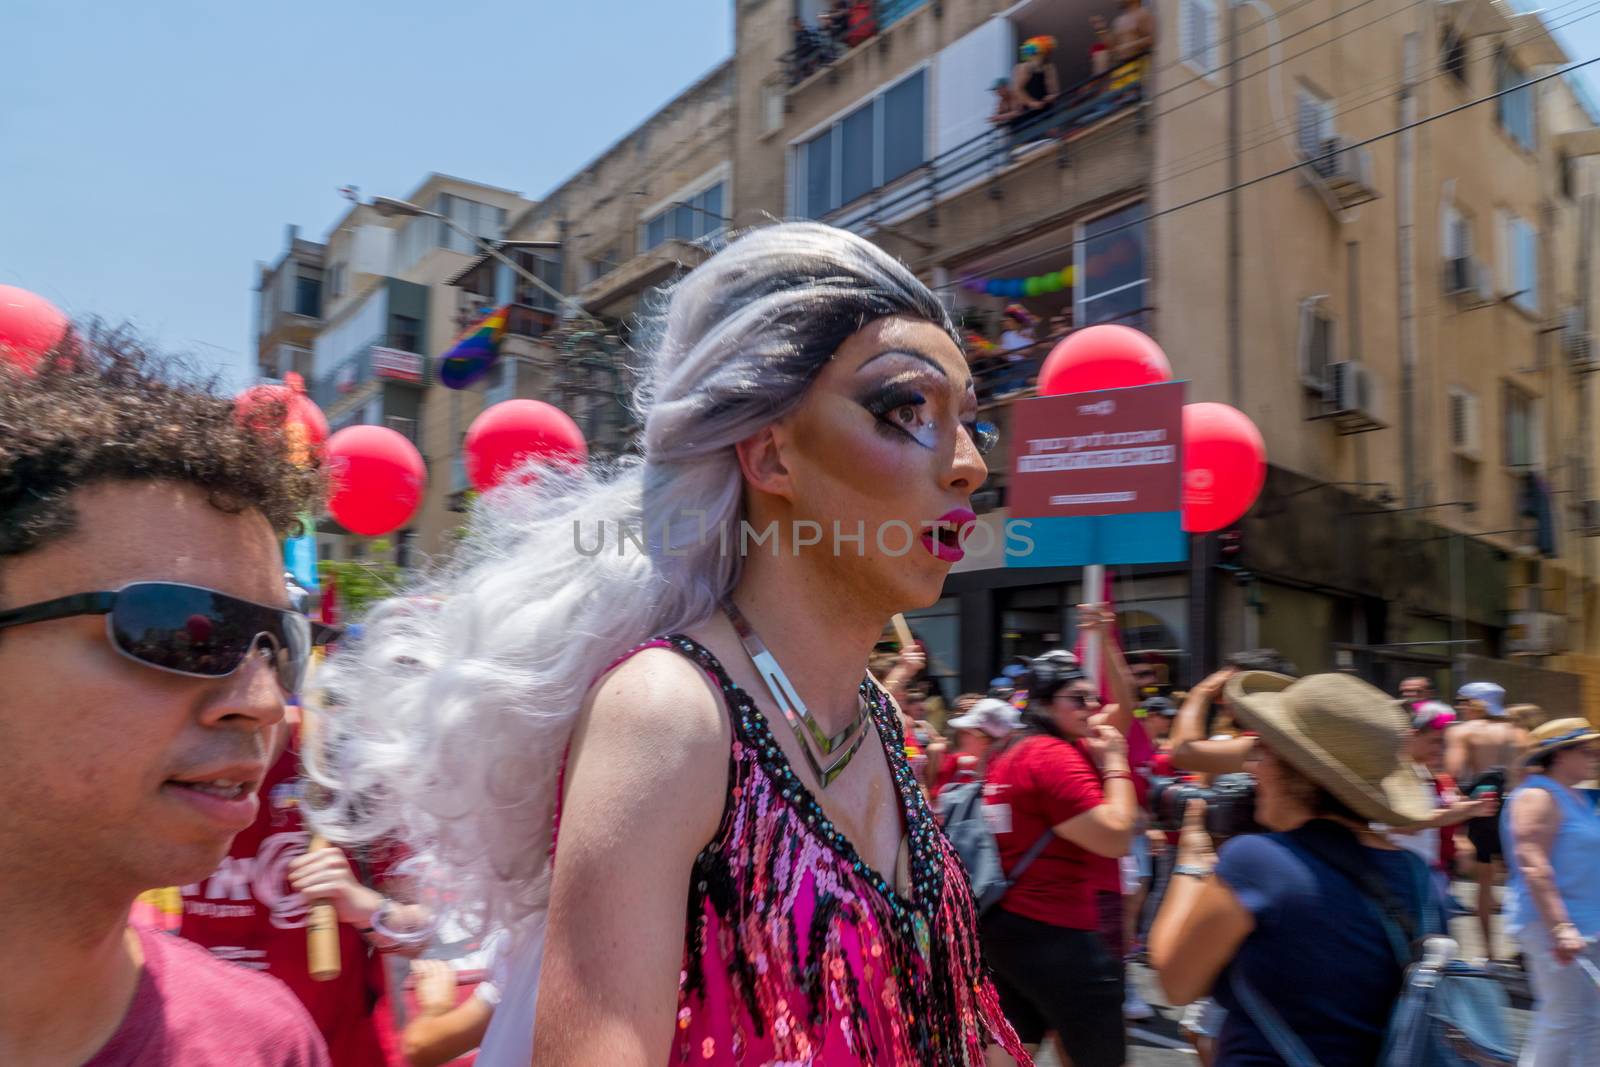 TEL-AVIV, ISRAEL - JUNE 08, 2018: Various people march and take part in the annual pride parade of the LGBT community, in Tel-Aviv, Israel